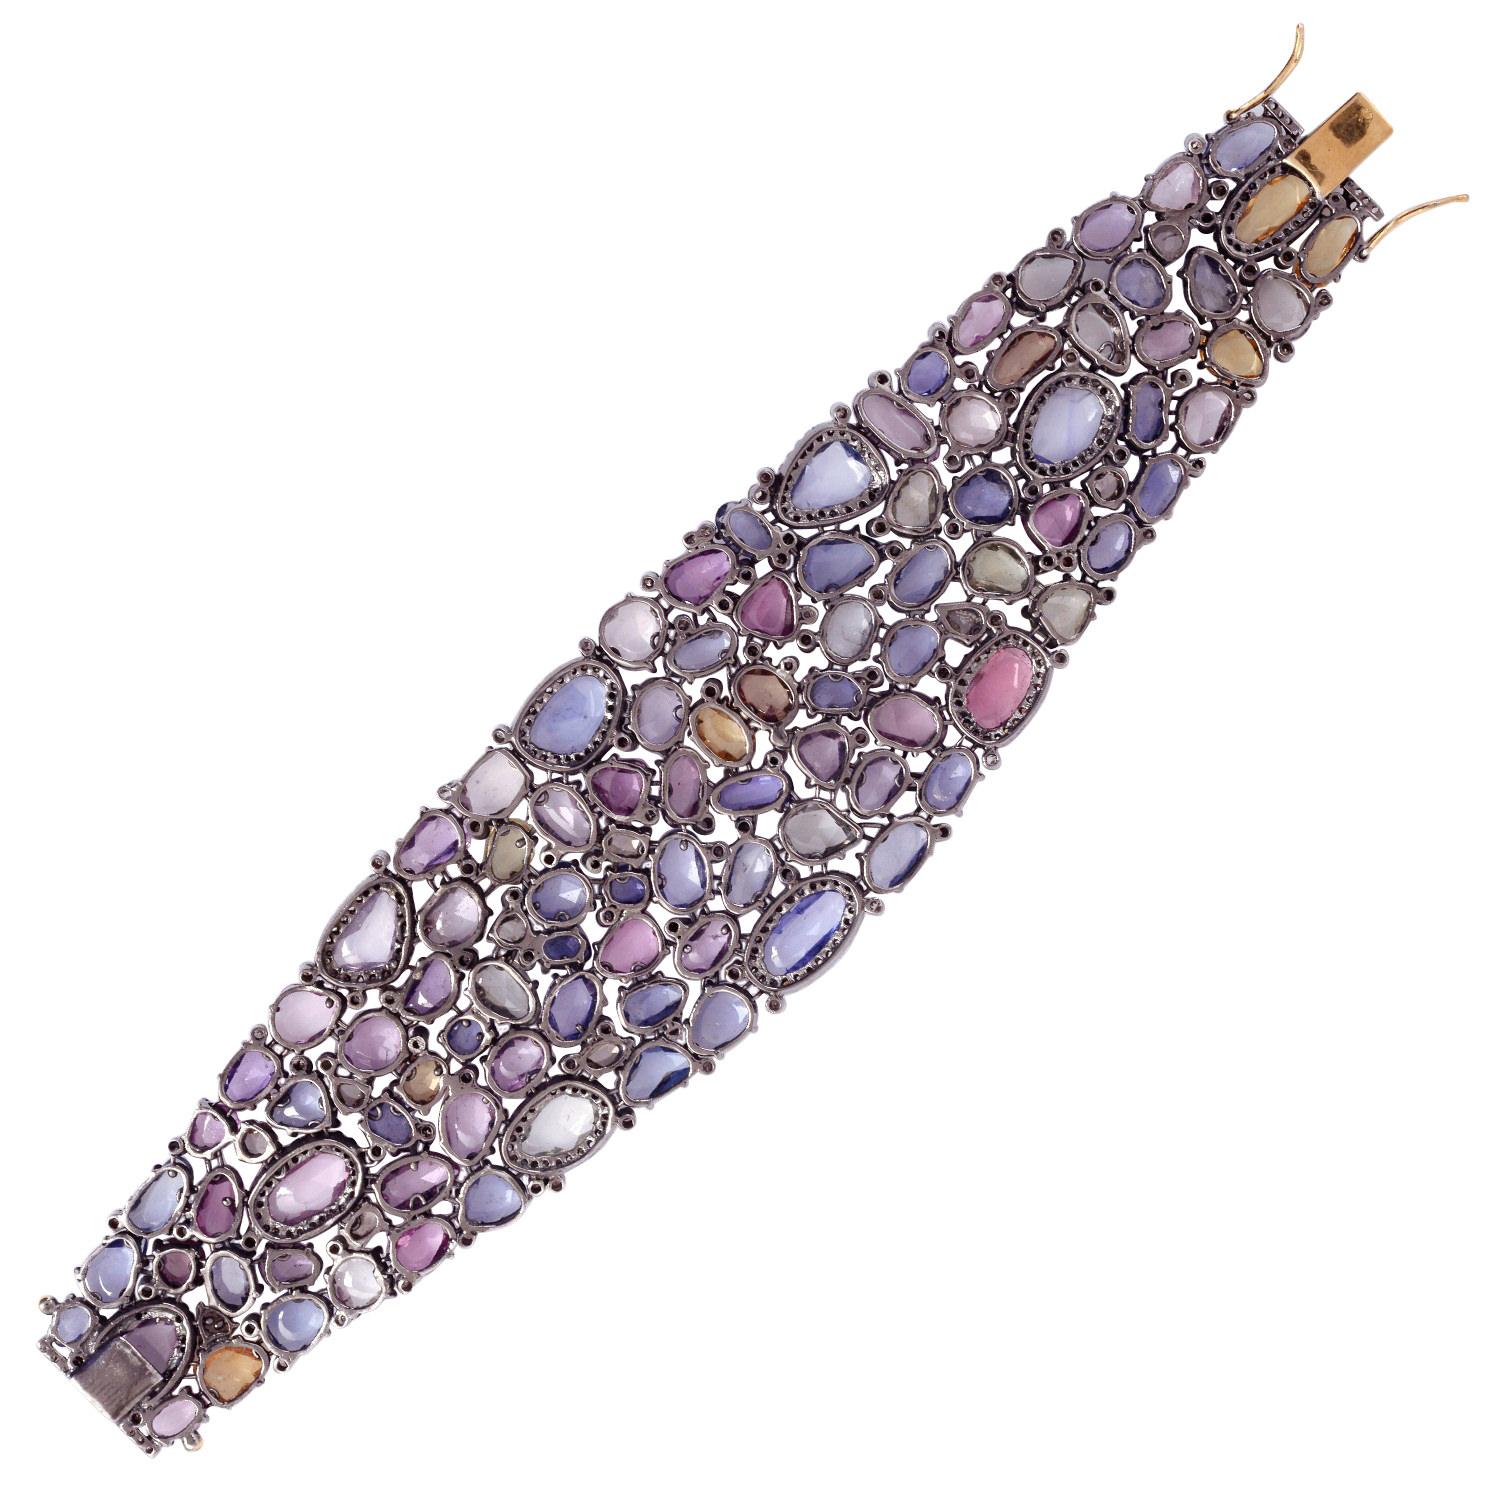 Mixed Cut 93.94 ct Multi Sapphire Bracelet With Diamonds Made In 18k White Gold & Silver For Sale